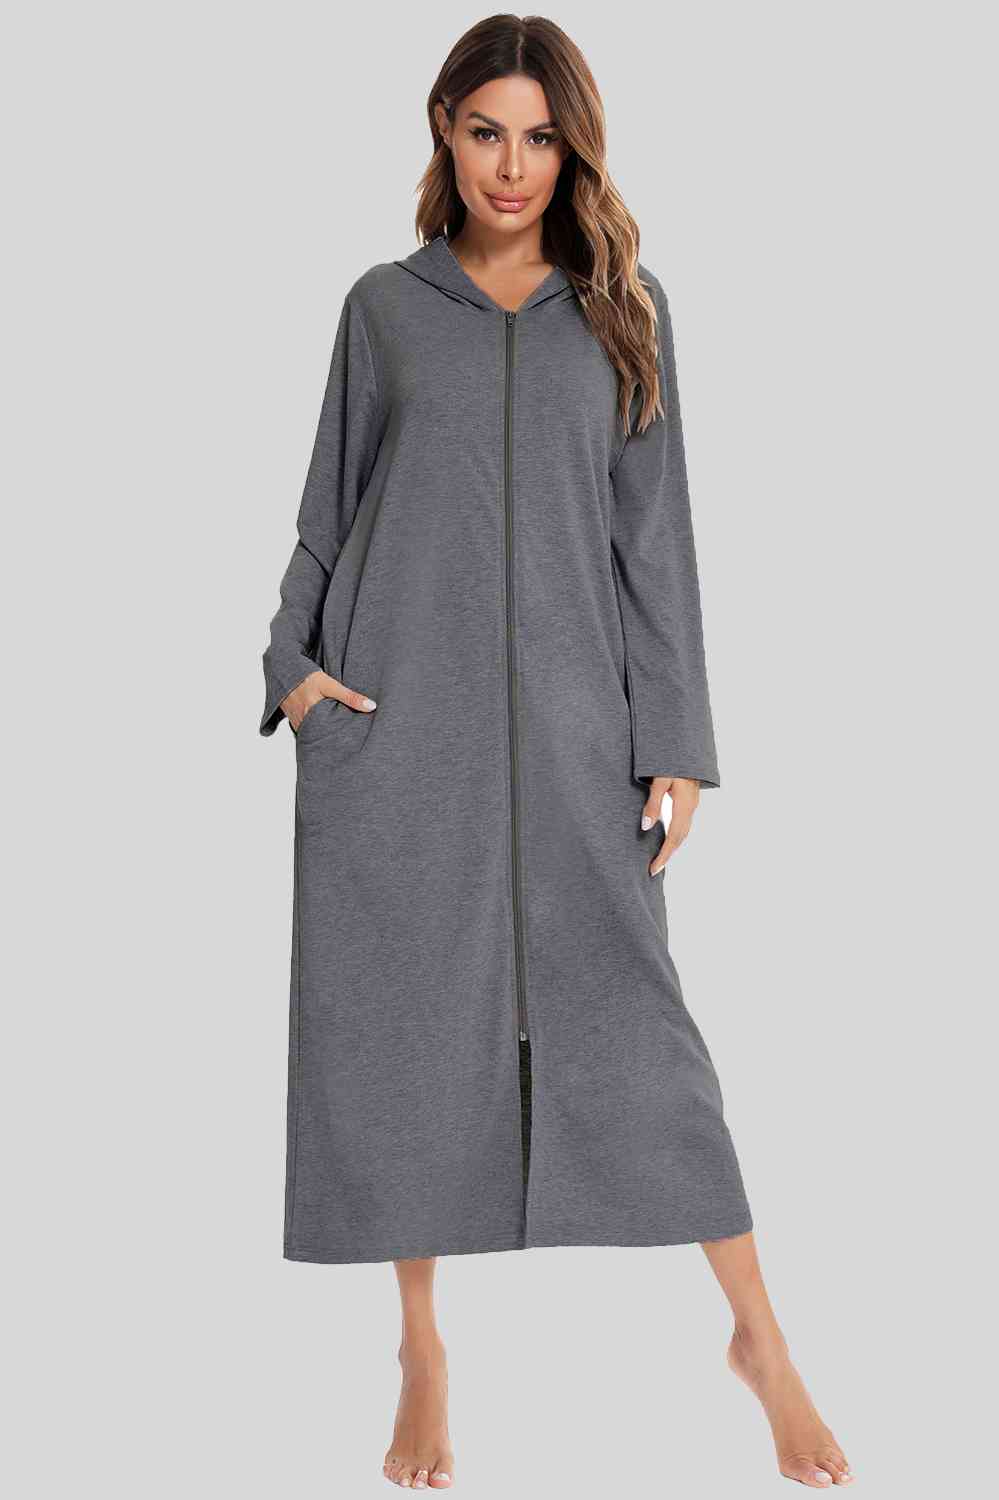 Zip Front Hooded Night Dress with Pockets - GemThreads Boutique